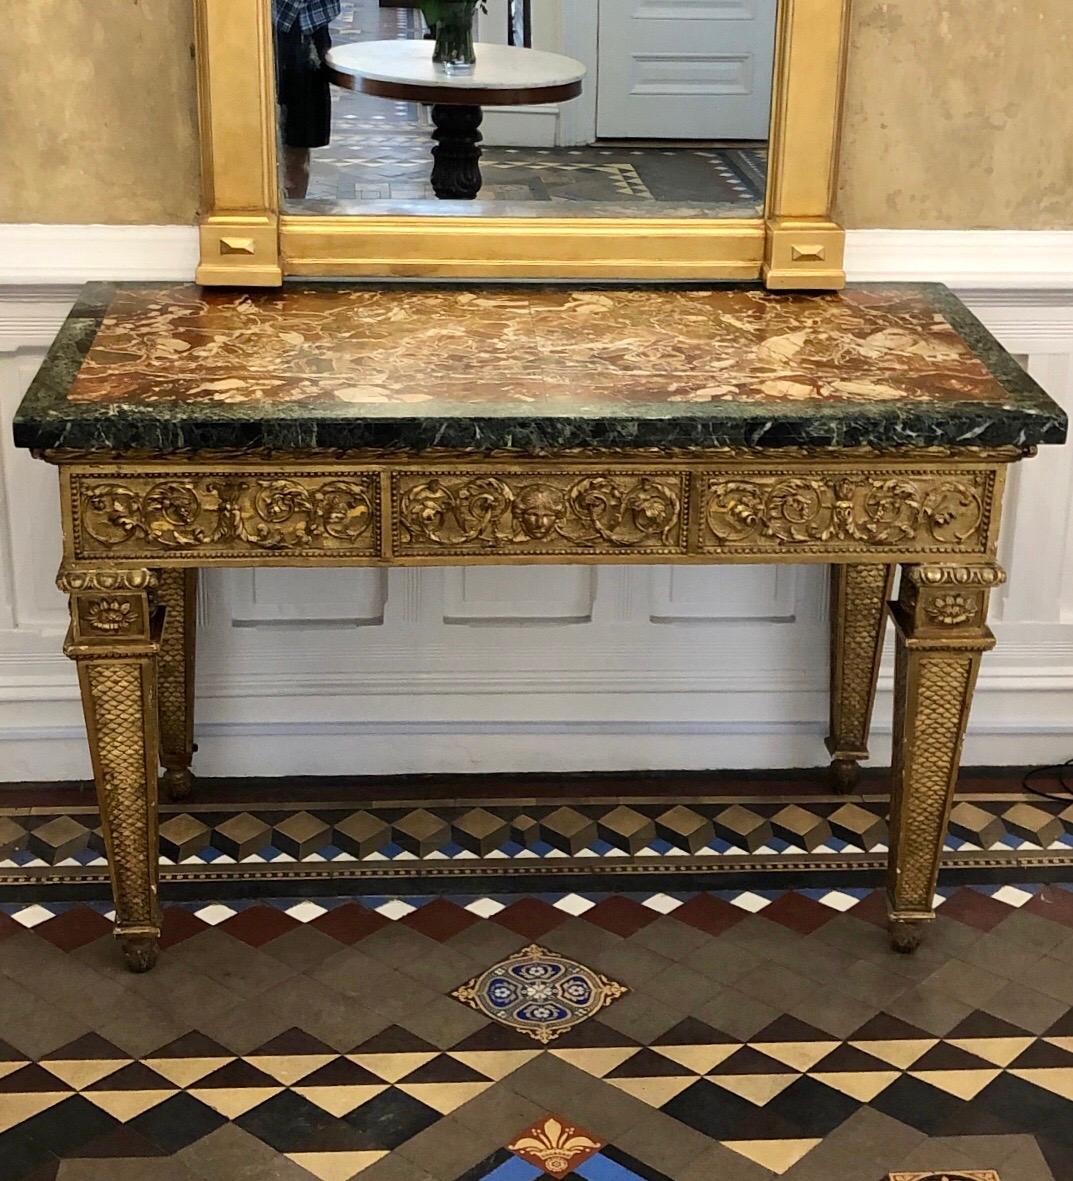 Extraordinary 18th century Italian Giltwood console table with original marble top. The Giltwood console platform has an tripartite carved frontal frieze with a central female mask flanked by scrolling leaves and bell flower swags. The consoles side